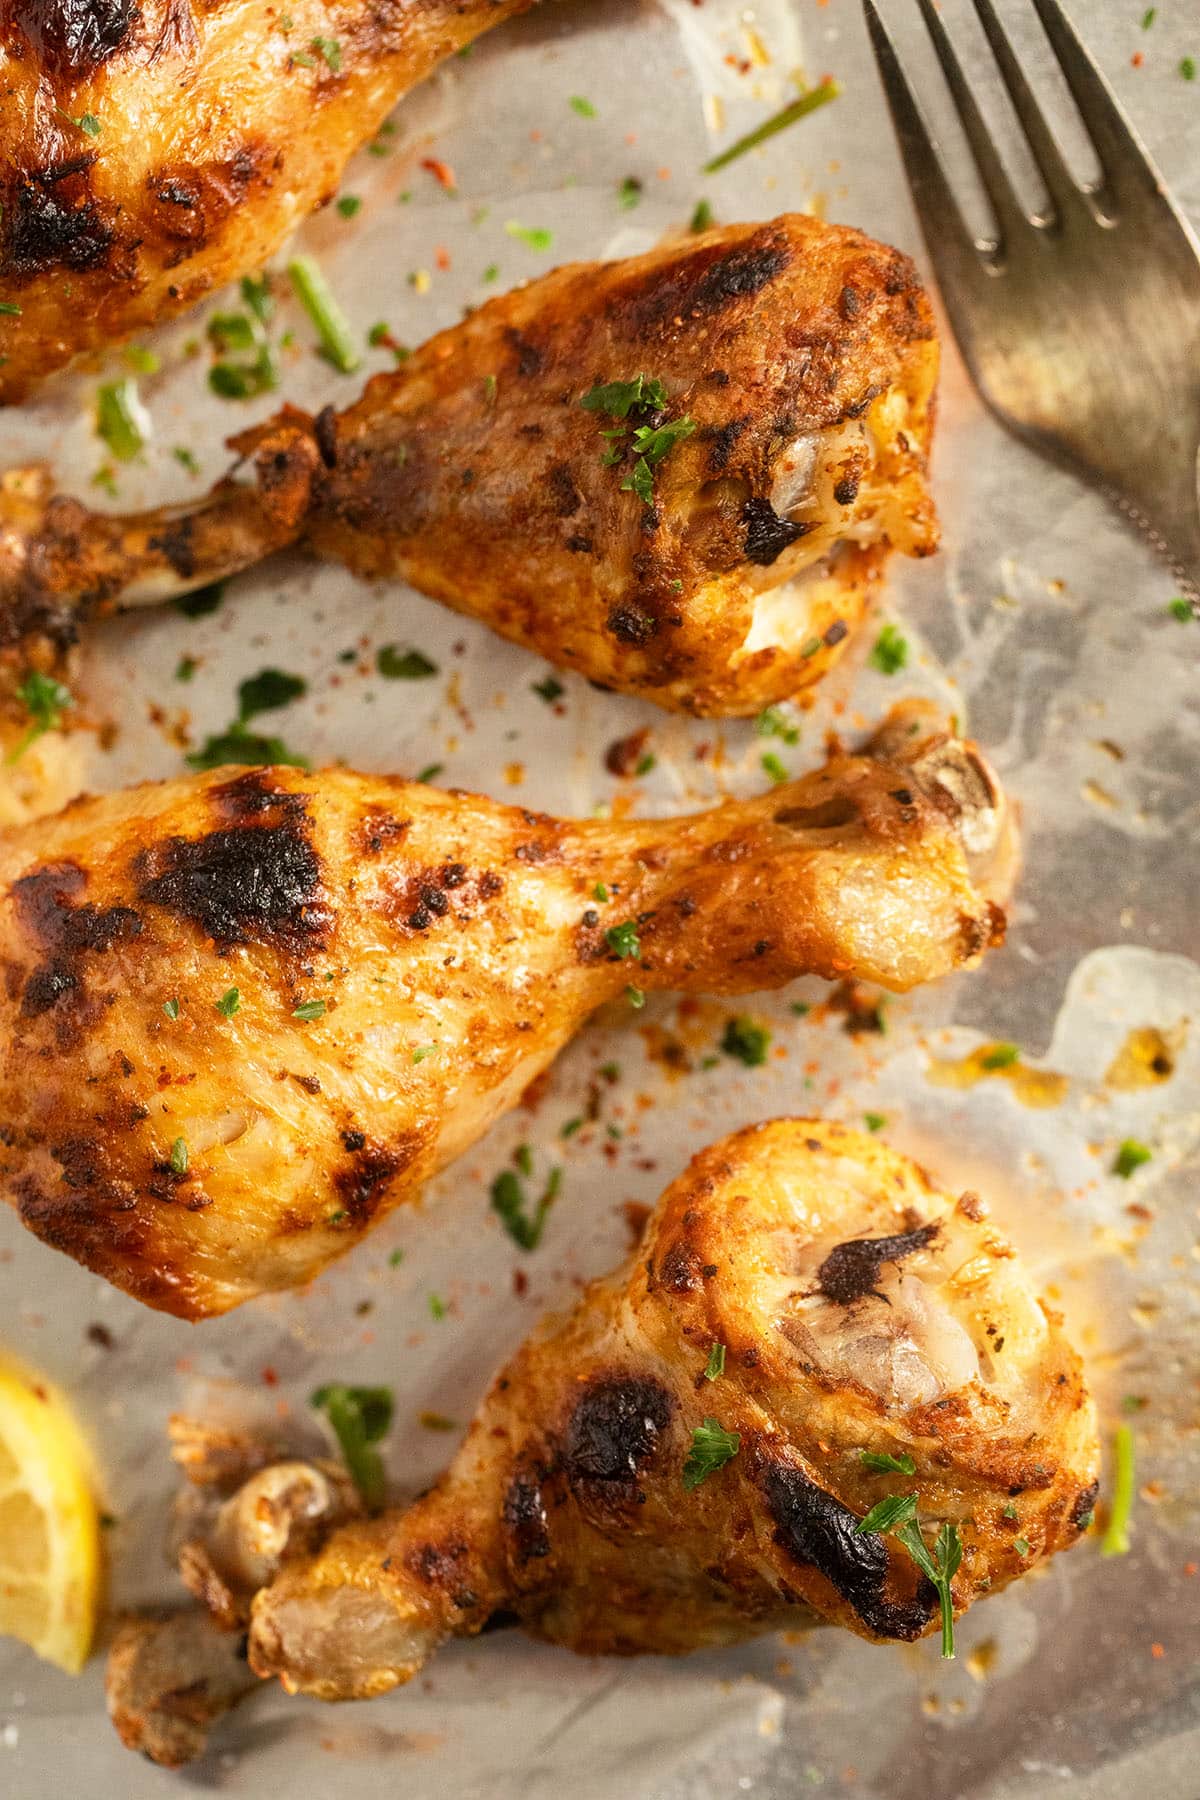 golden chicken legs with charred marks and a silver fork close up.